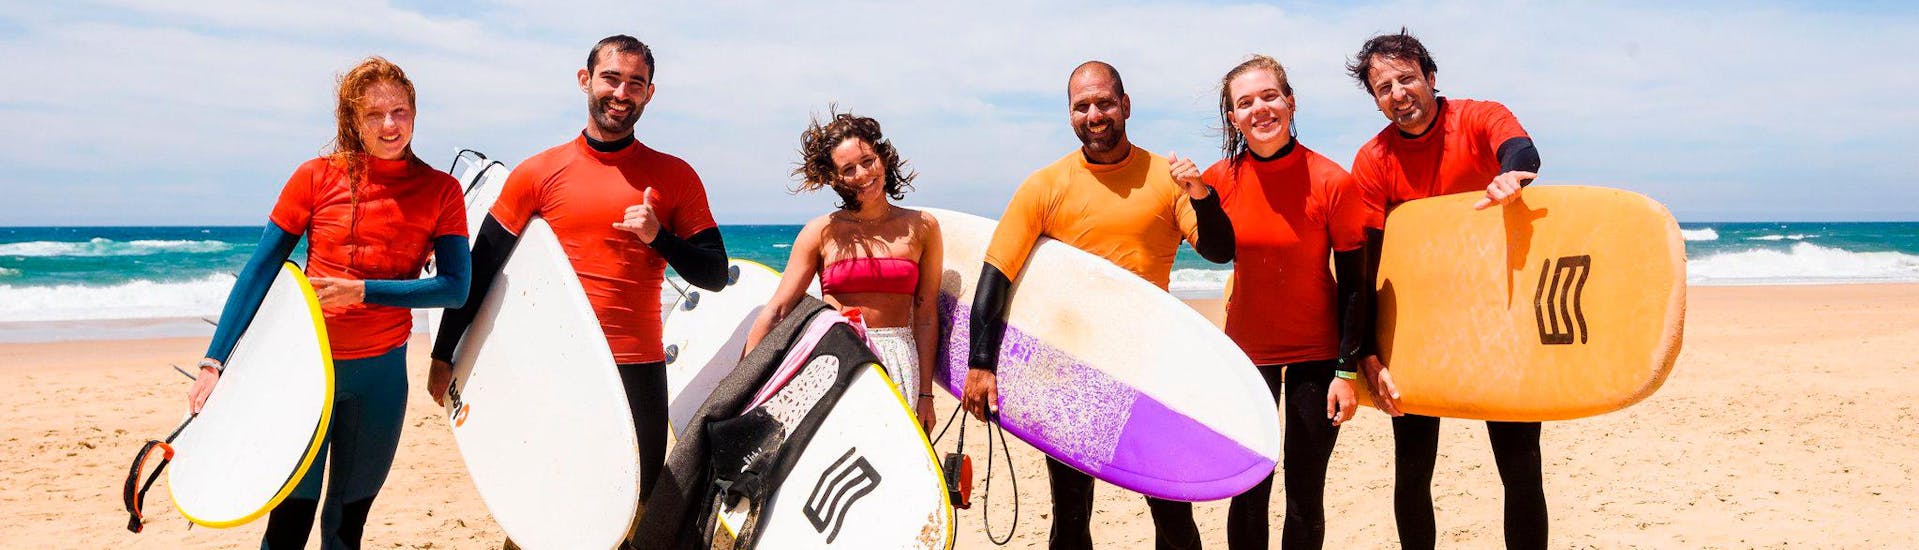 The SeaKrew Ericeira surf instructors pose together happily for a photo